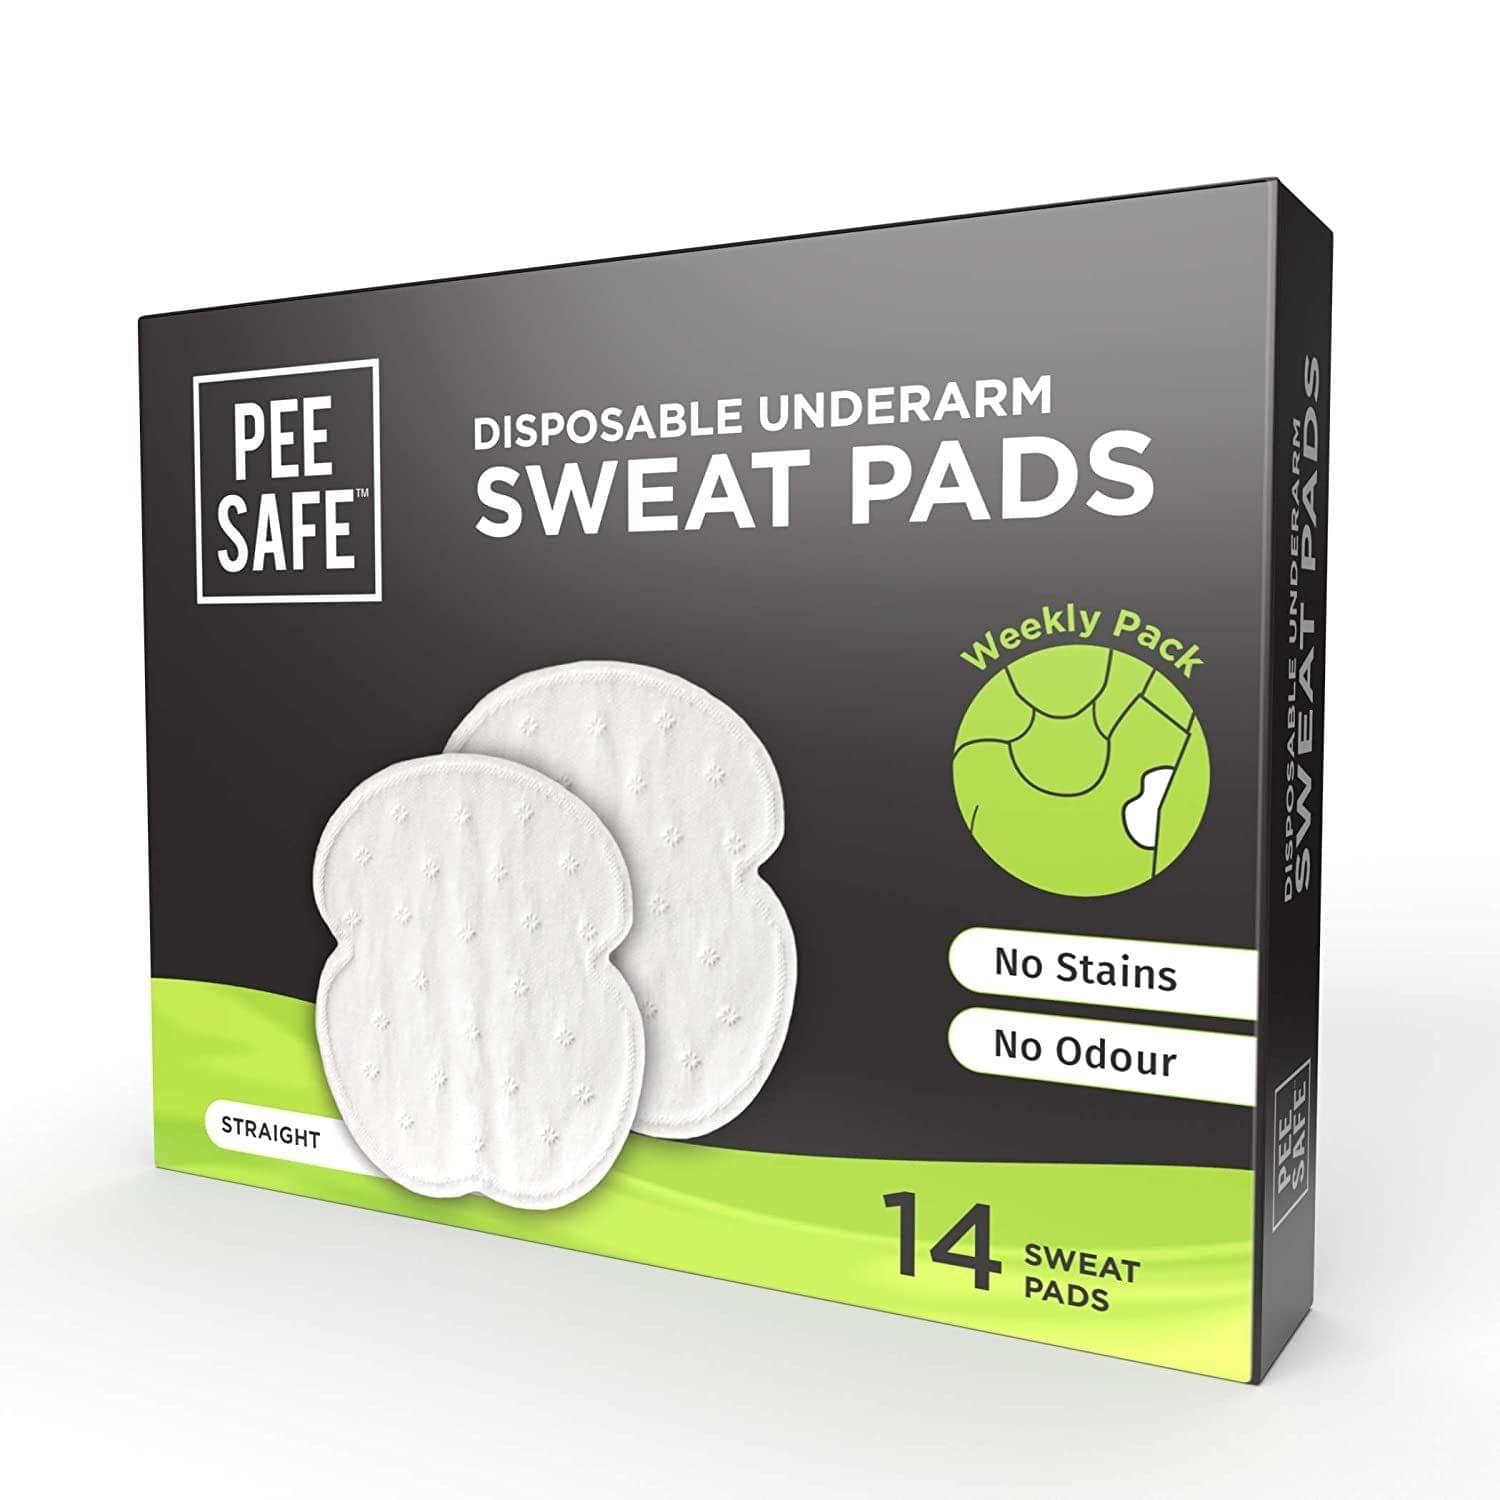 Pee Safe Disposable Underarm Sweat Pads - Straight, Prevents Stains